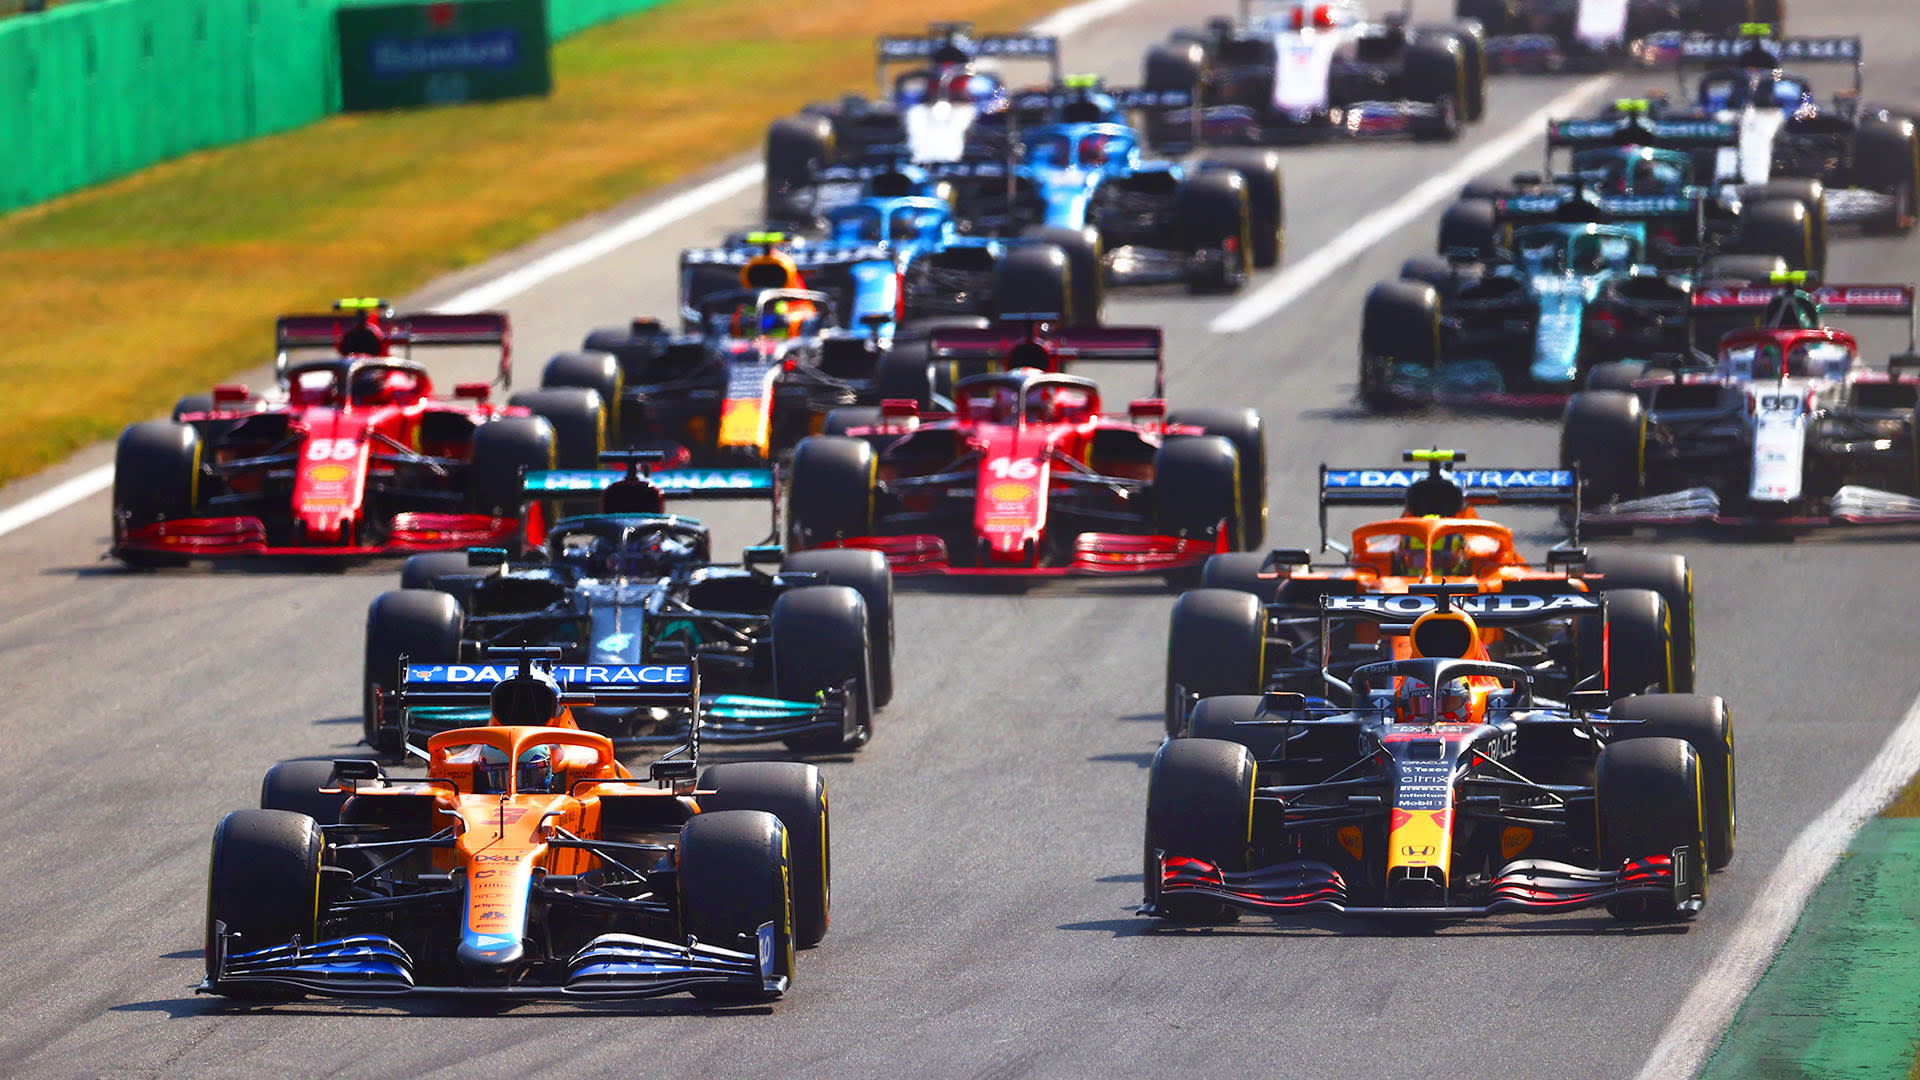 8 reasons 2021 will go down in F1 history as one of the classic seasons Formula 1®